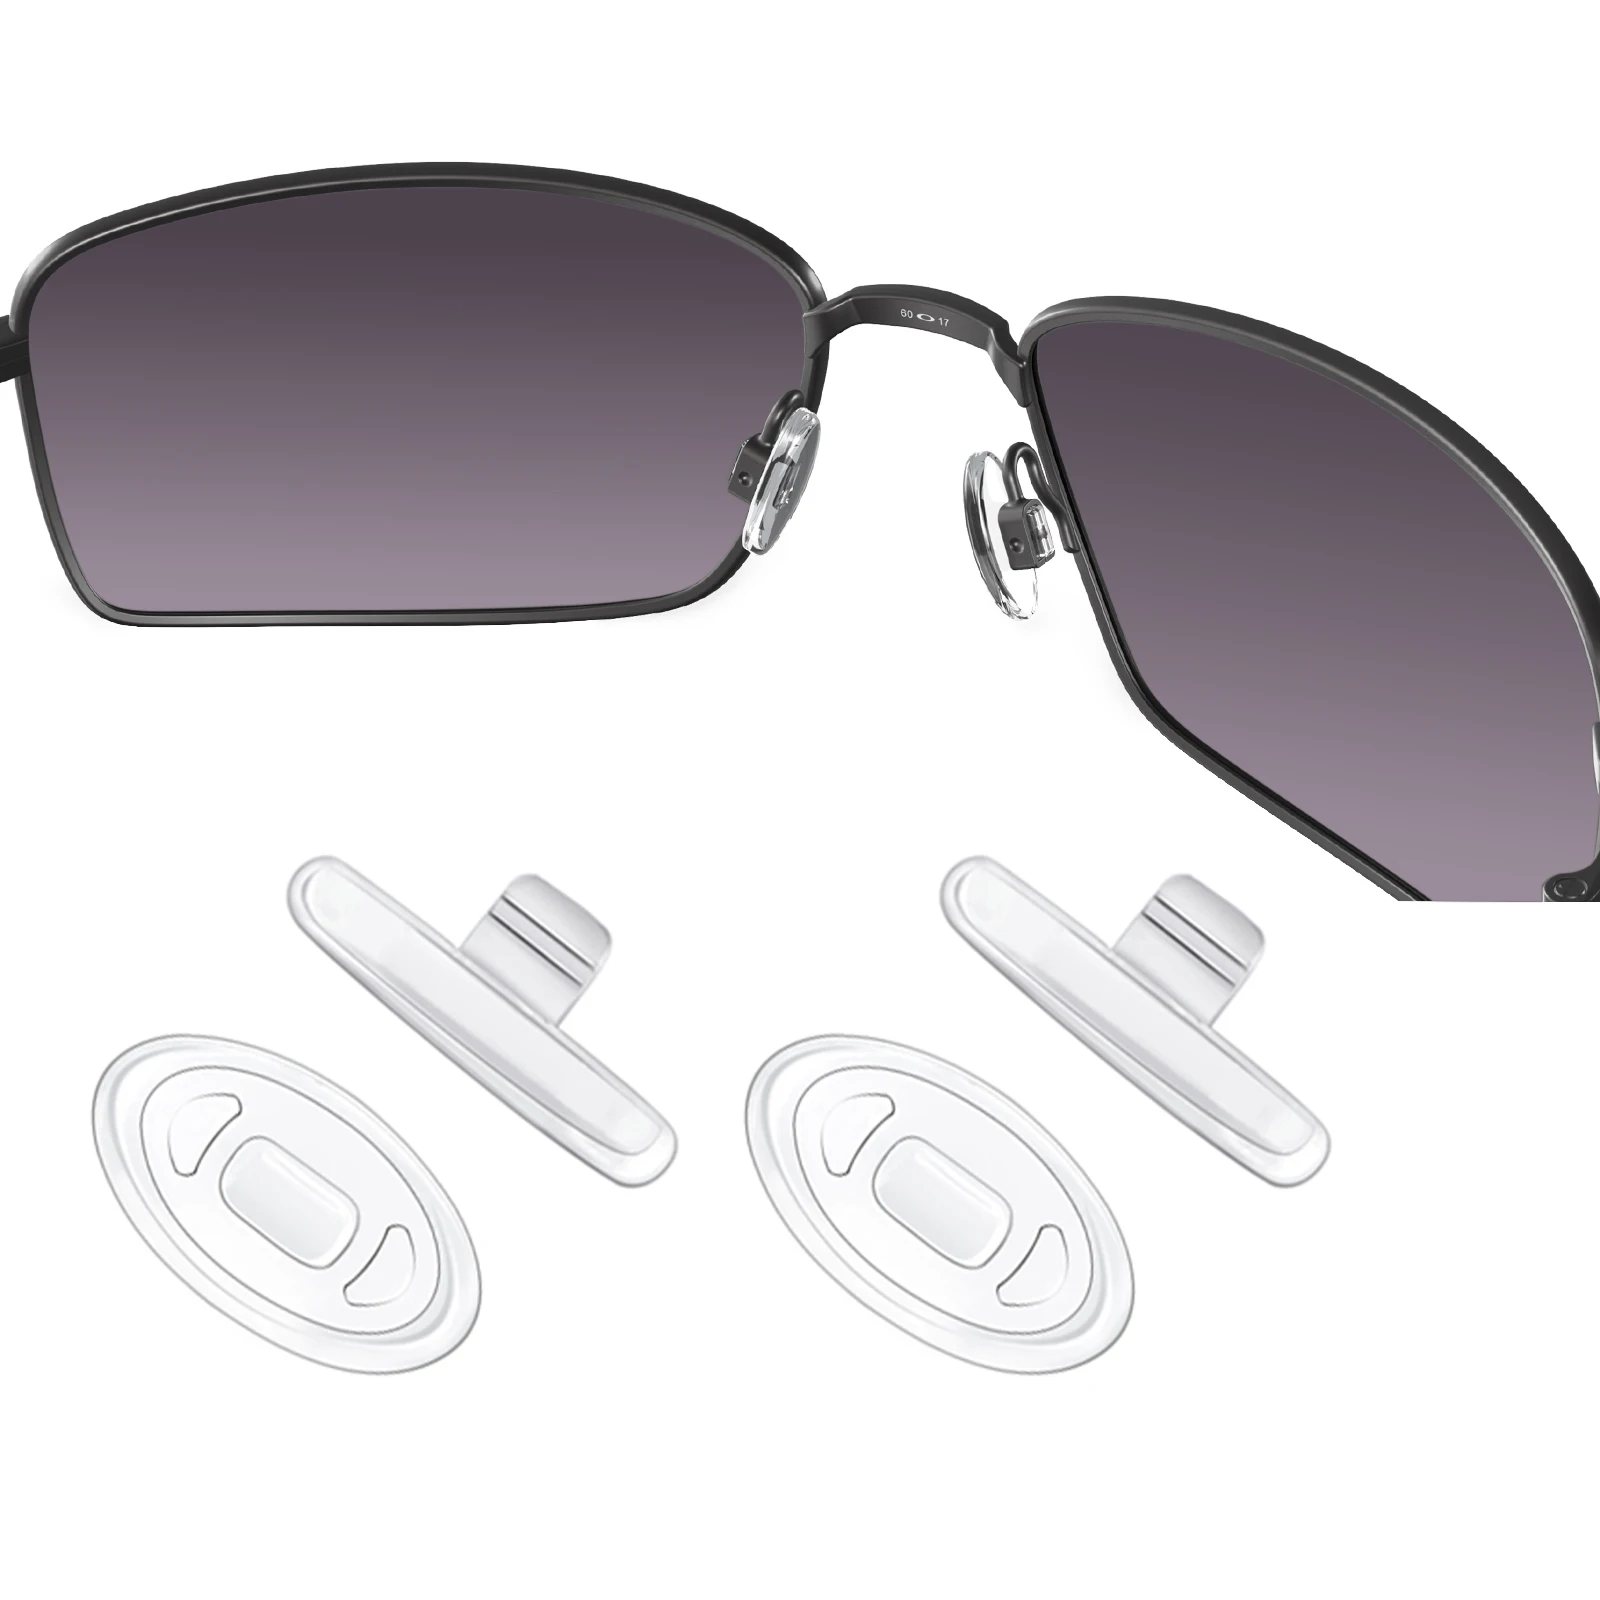 

OOWLIT Rubber Clear Nosepads Replacement for Oakley Square Wire 2.0 3.0 / Square Wire 2 2014 / Big (W) Square Wire Sunglasses